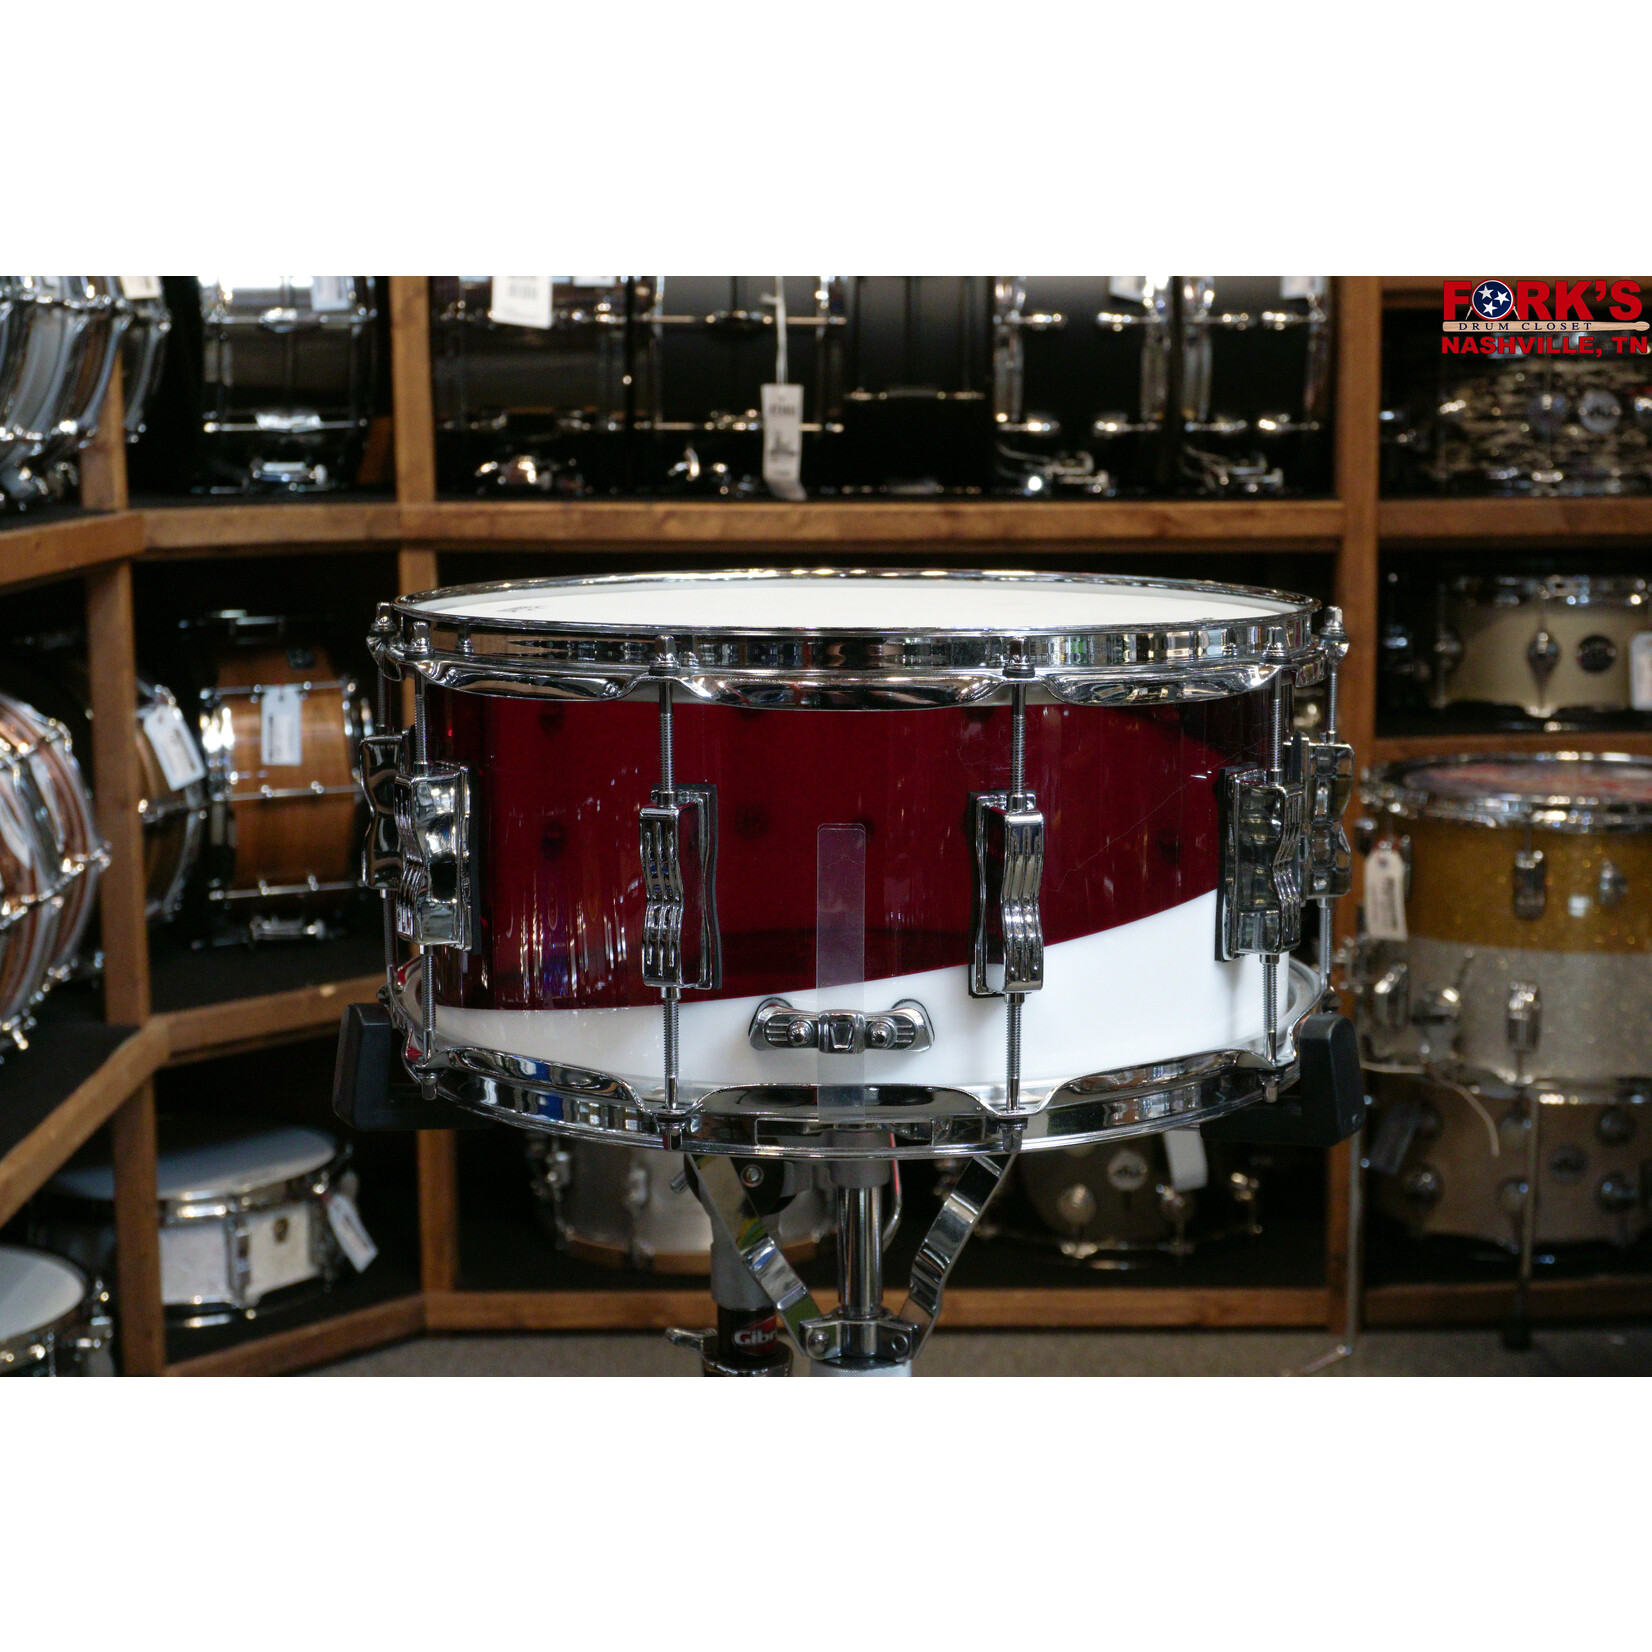 Ludwig Ludwig 6.5x14 Vistalite Snare Drum - "Red/White"